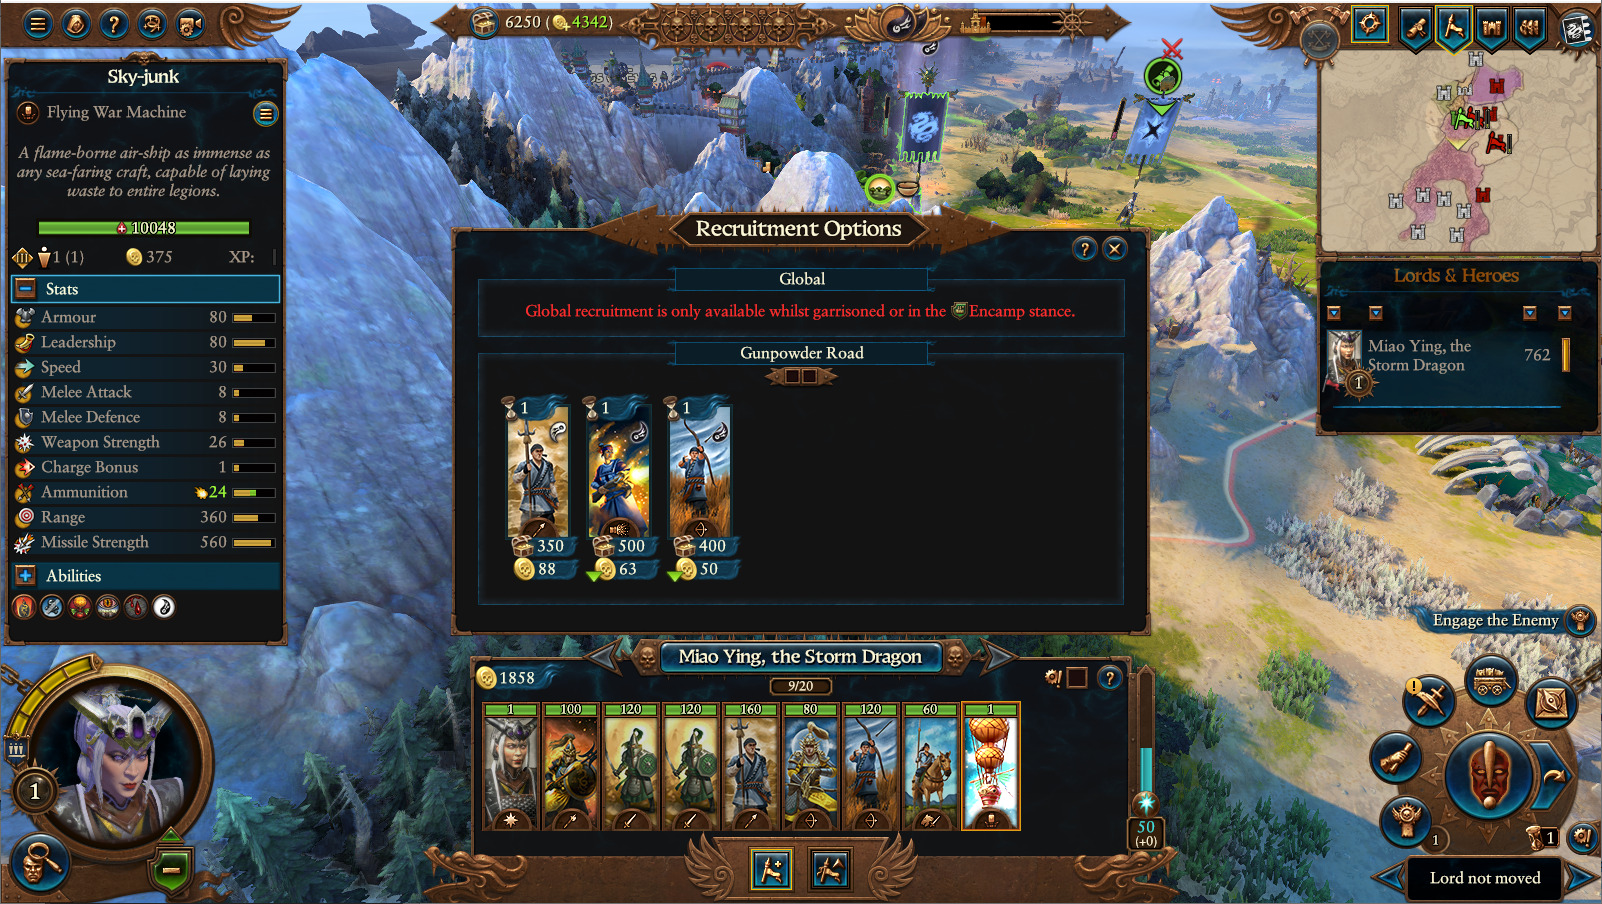 An image of the Total War: WARHAMMER III in-game HUD in a brown-gold color rather than the default red format.